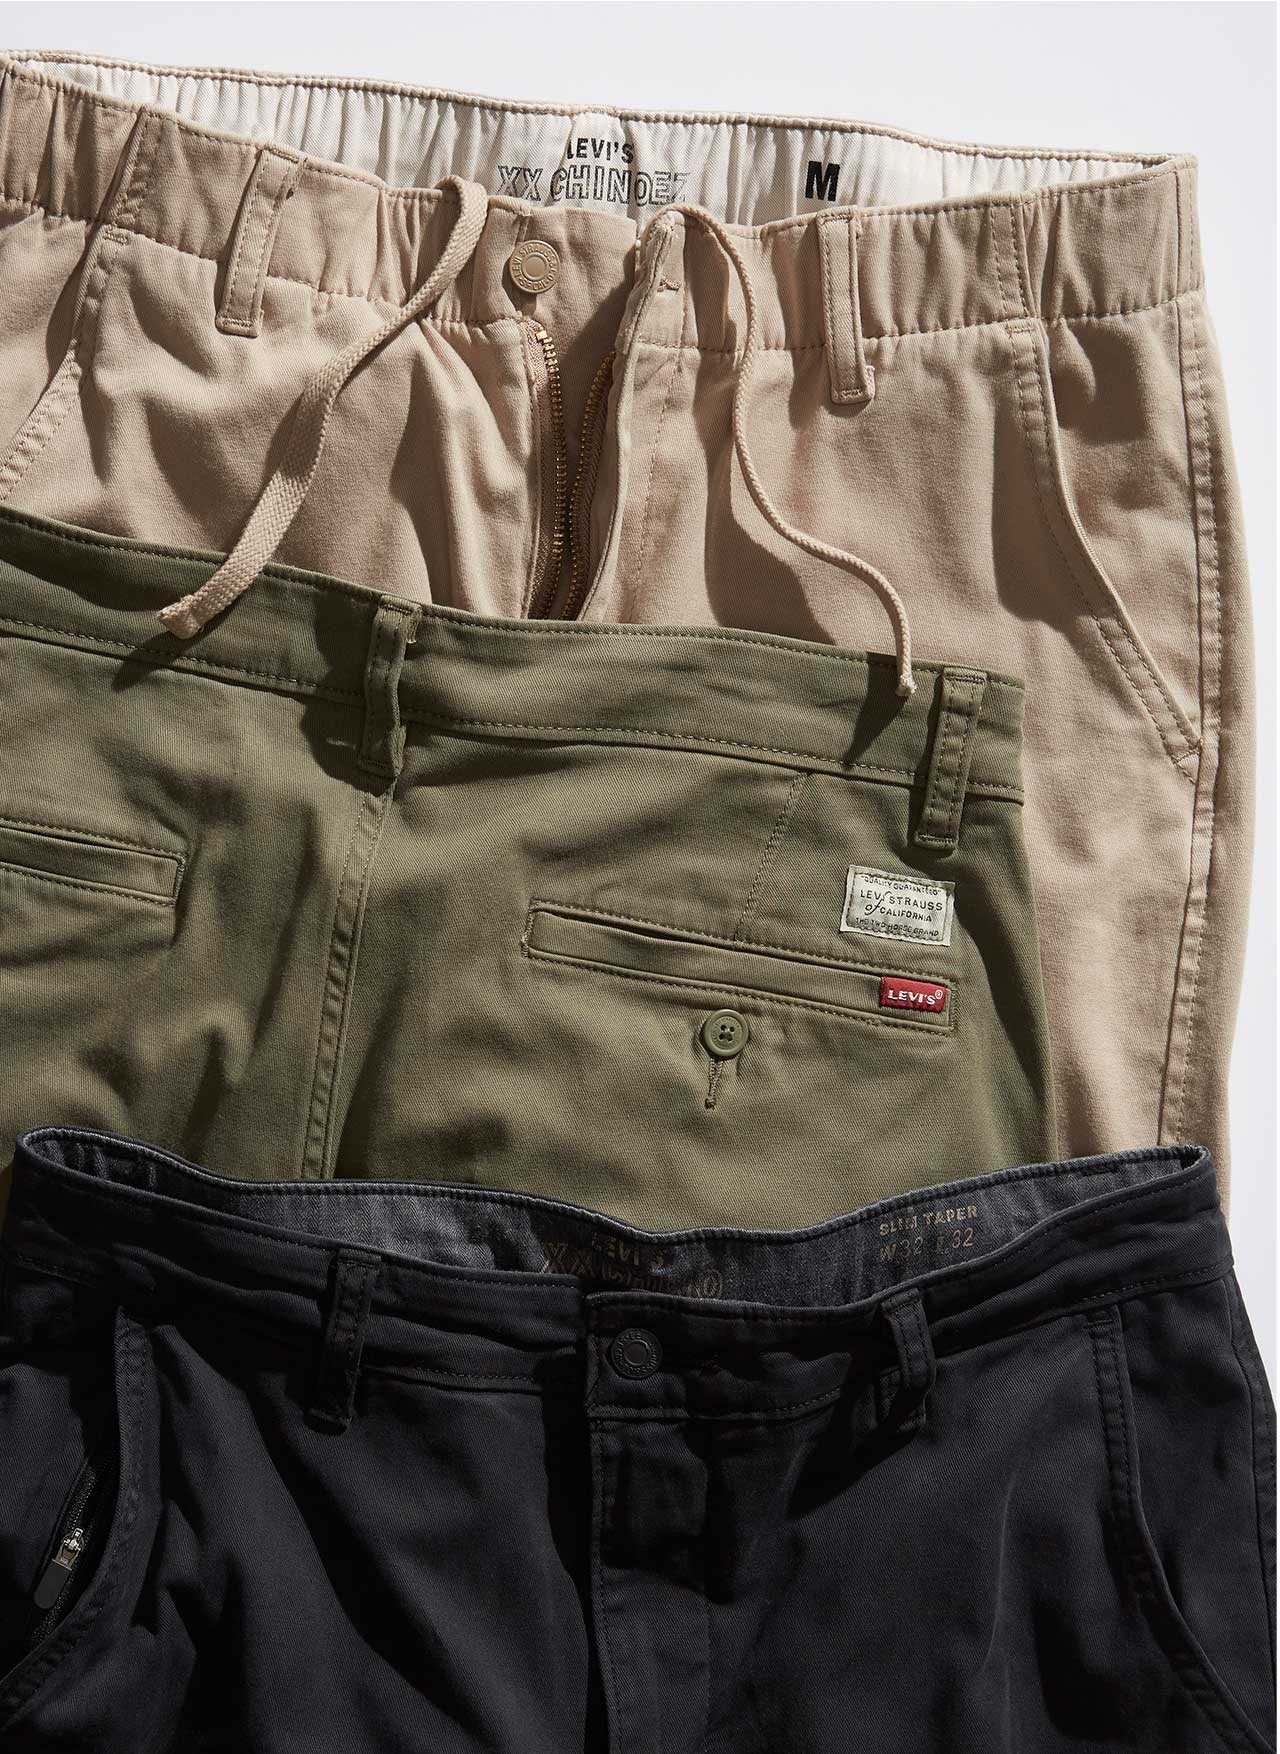 LEVI'S® CHINOS ARE MADE TO FIT YOUR LIFESTYLE